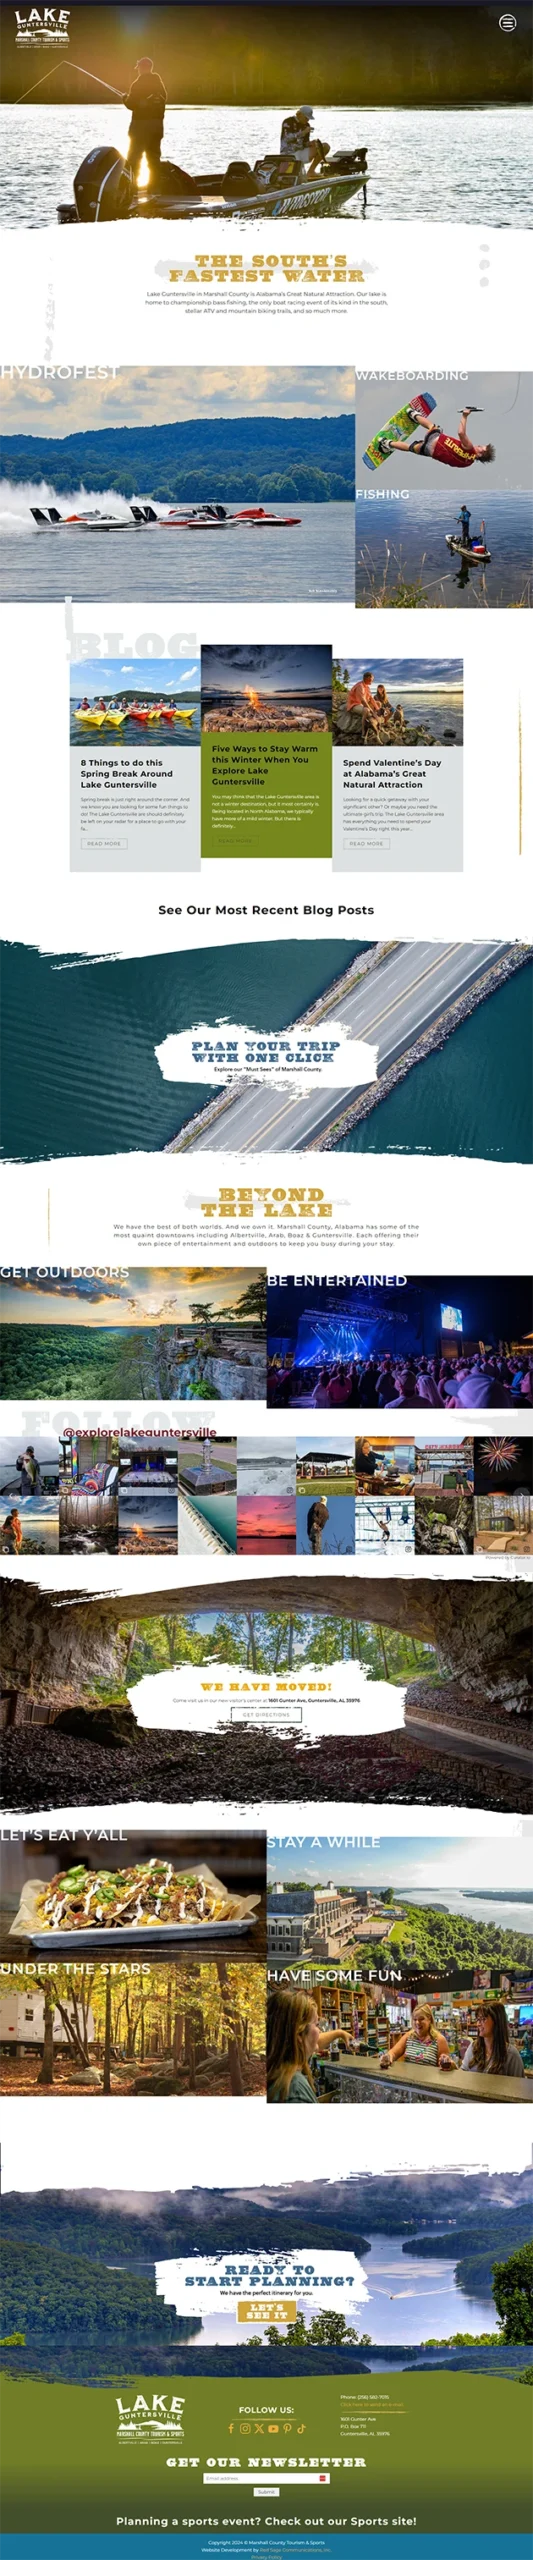 a full homepage layout for Explore Lake Guntersville's tourism website design, from destination marketing agency Red Sage